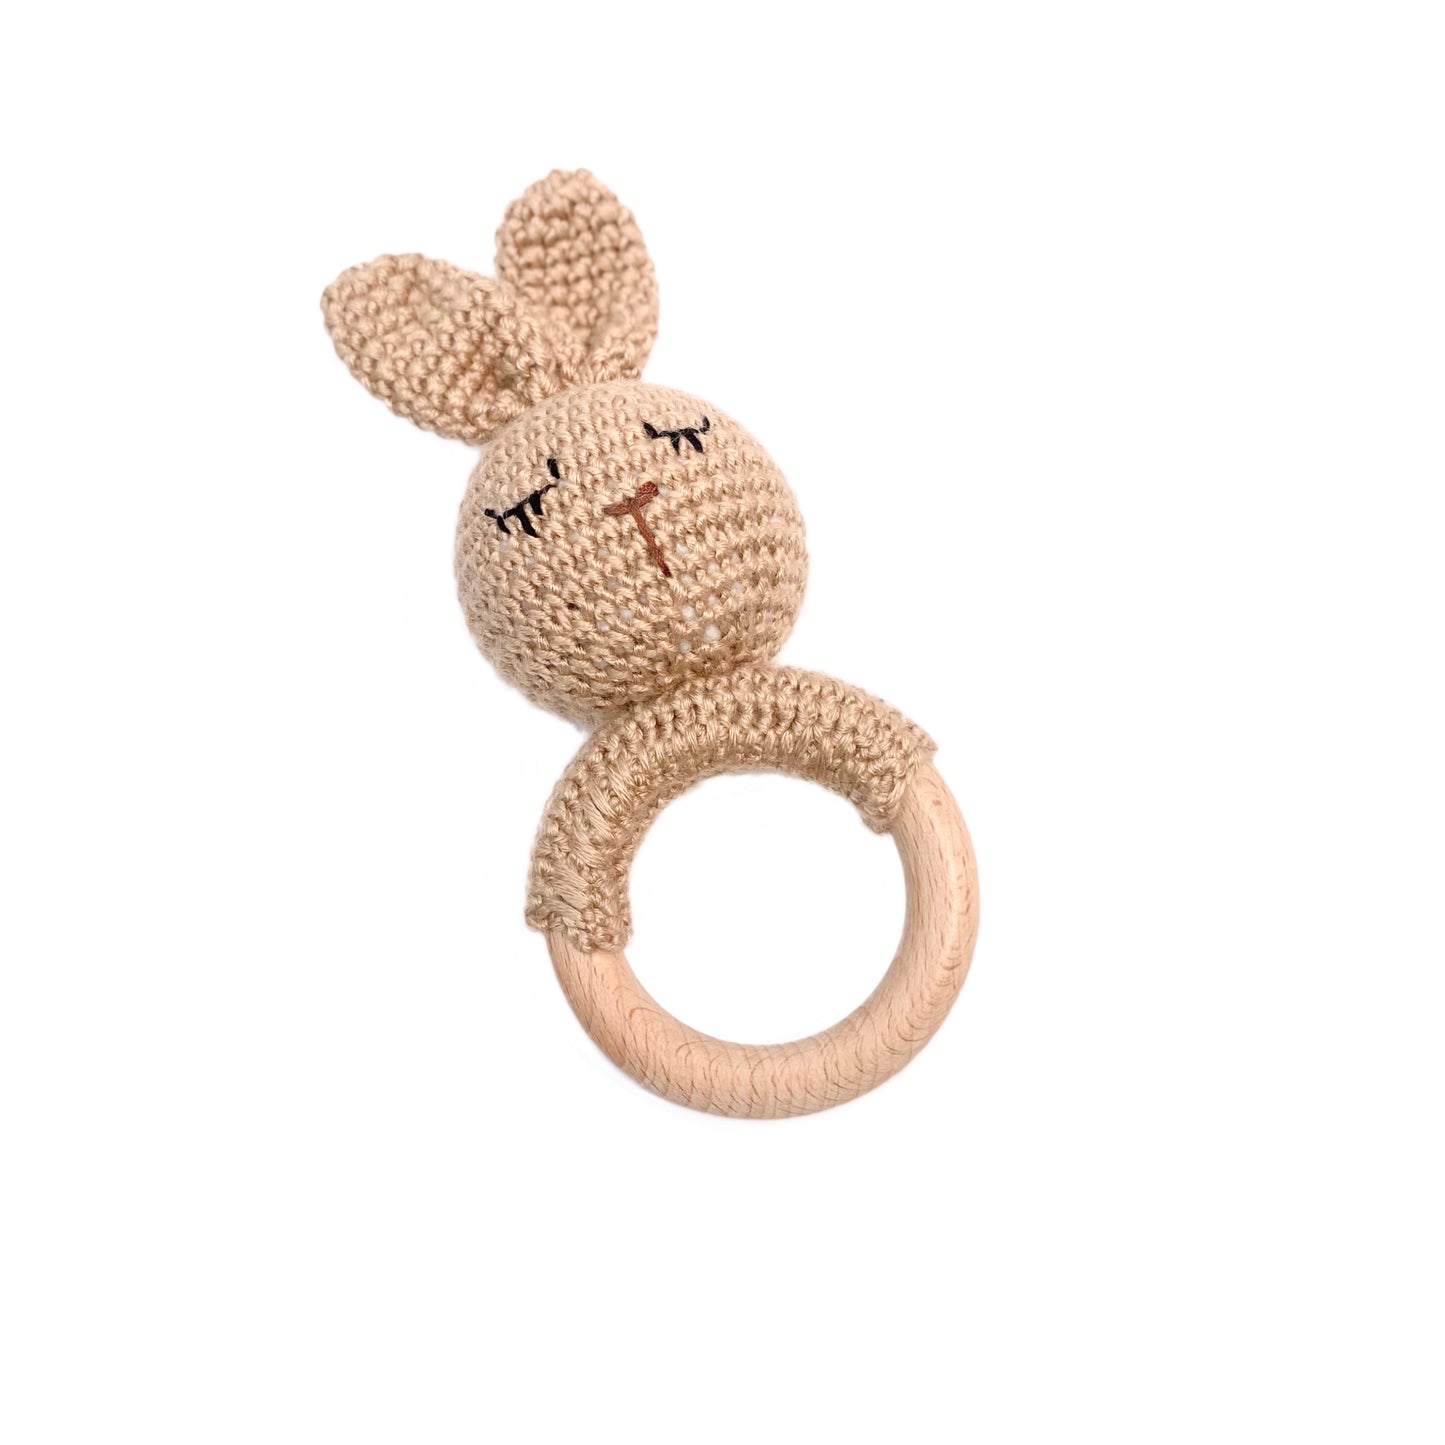 Baby rattle in a rabbit design, made from wool and bamboo.